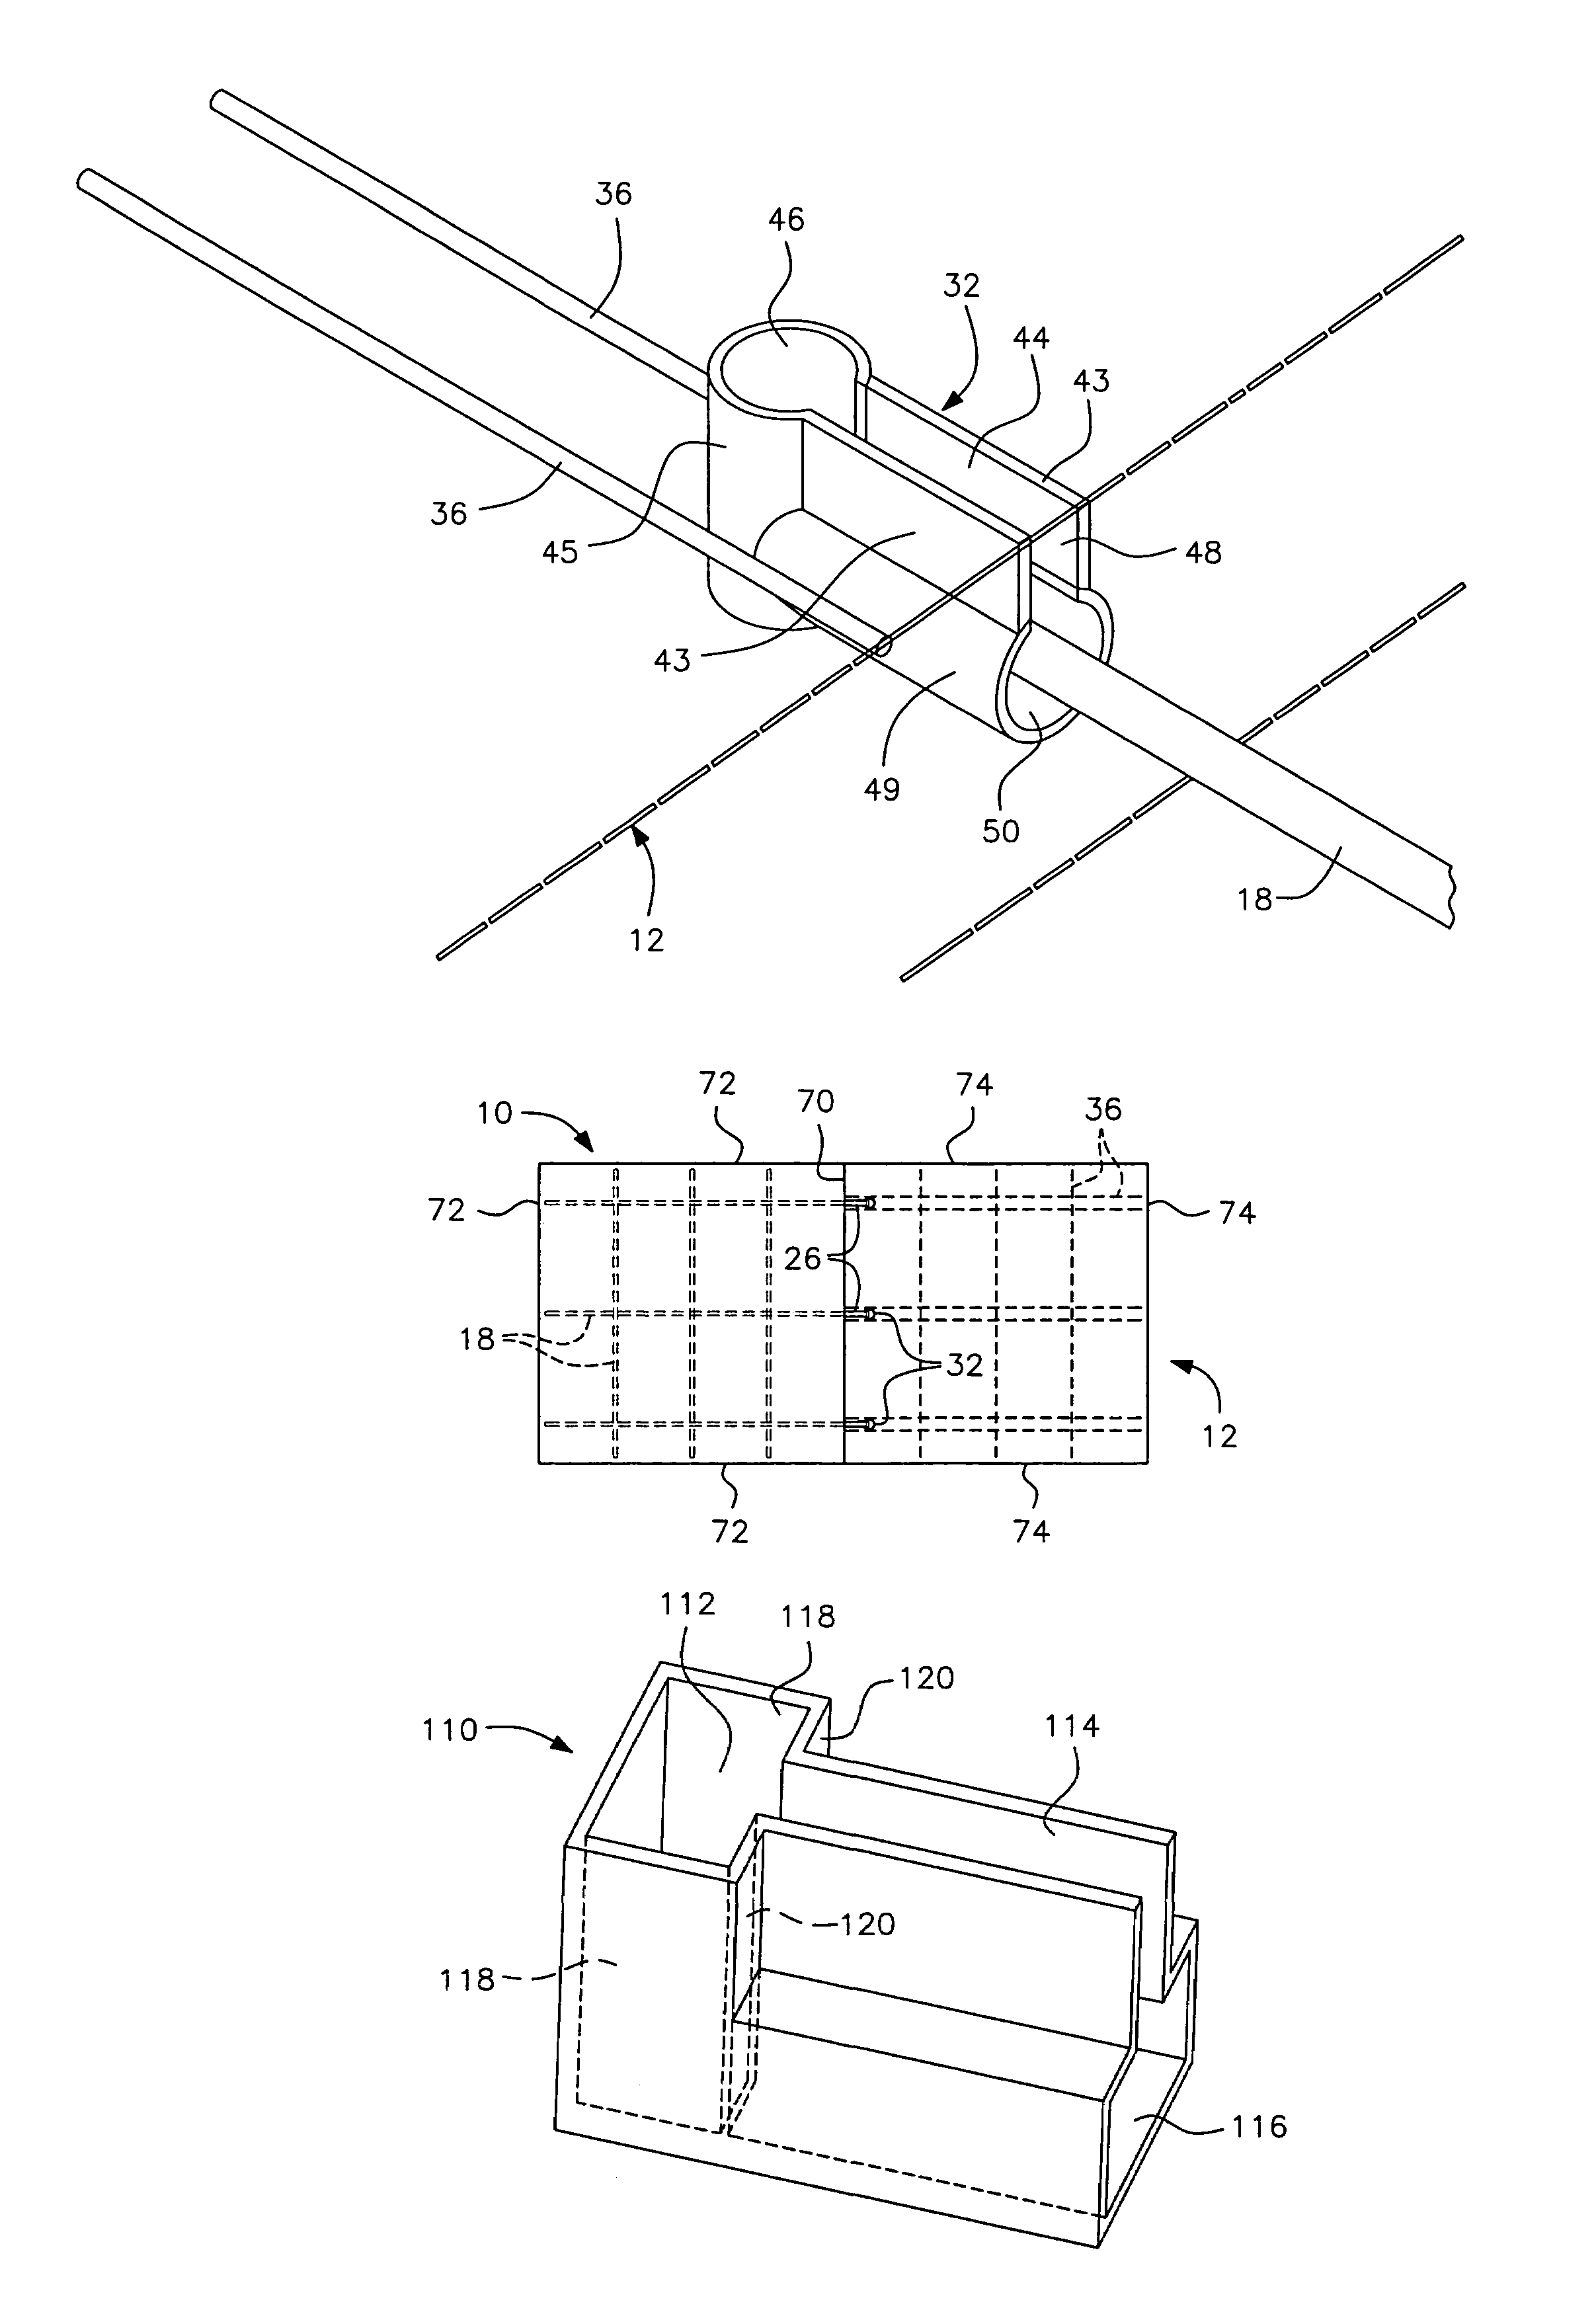 Precast concrete slab system and method therefor